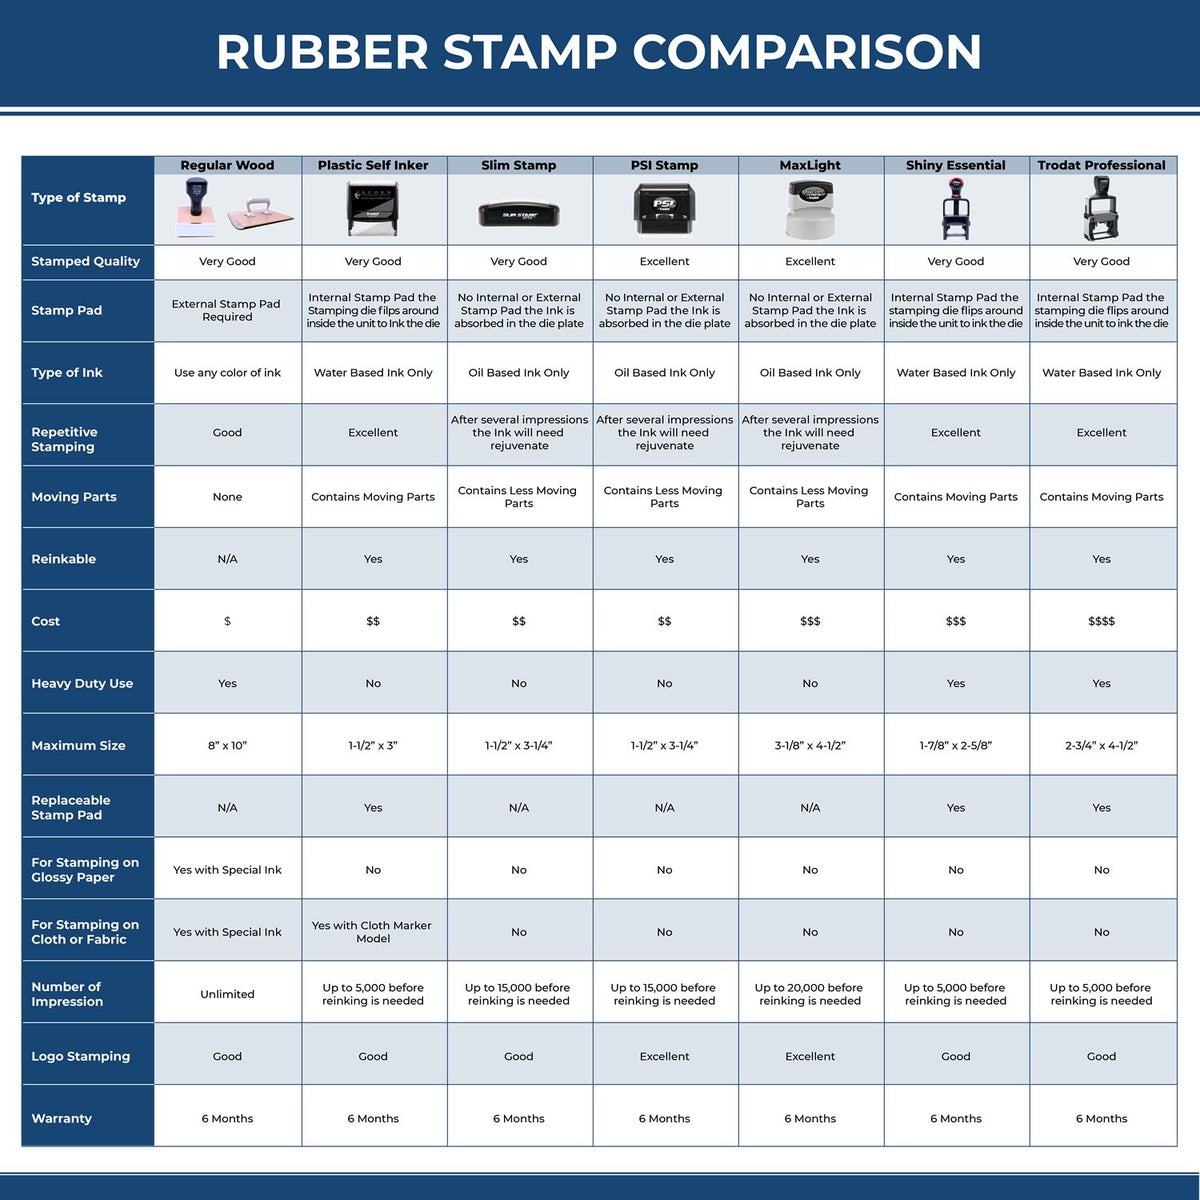 A comparison chart for the different types of mount models available for the PSI Maine Notary Stamp.